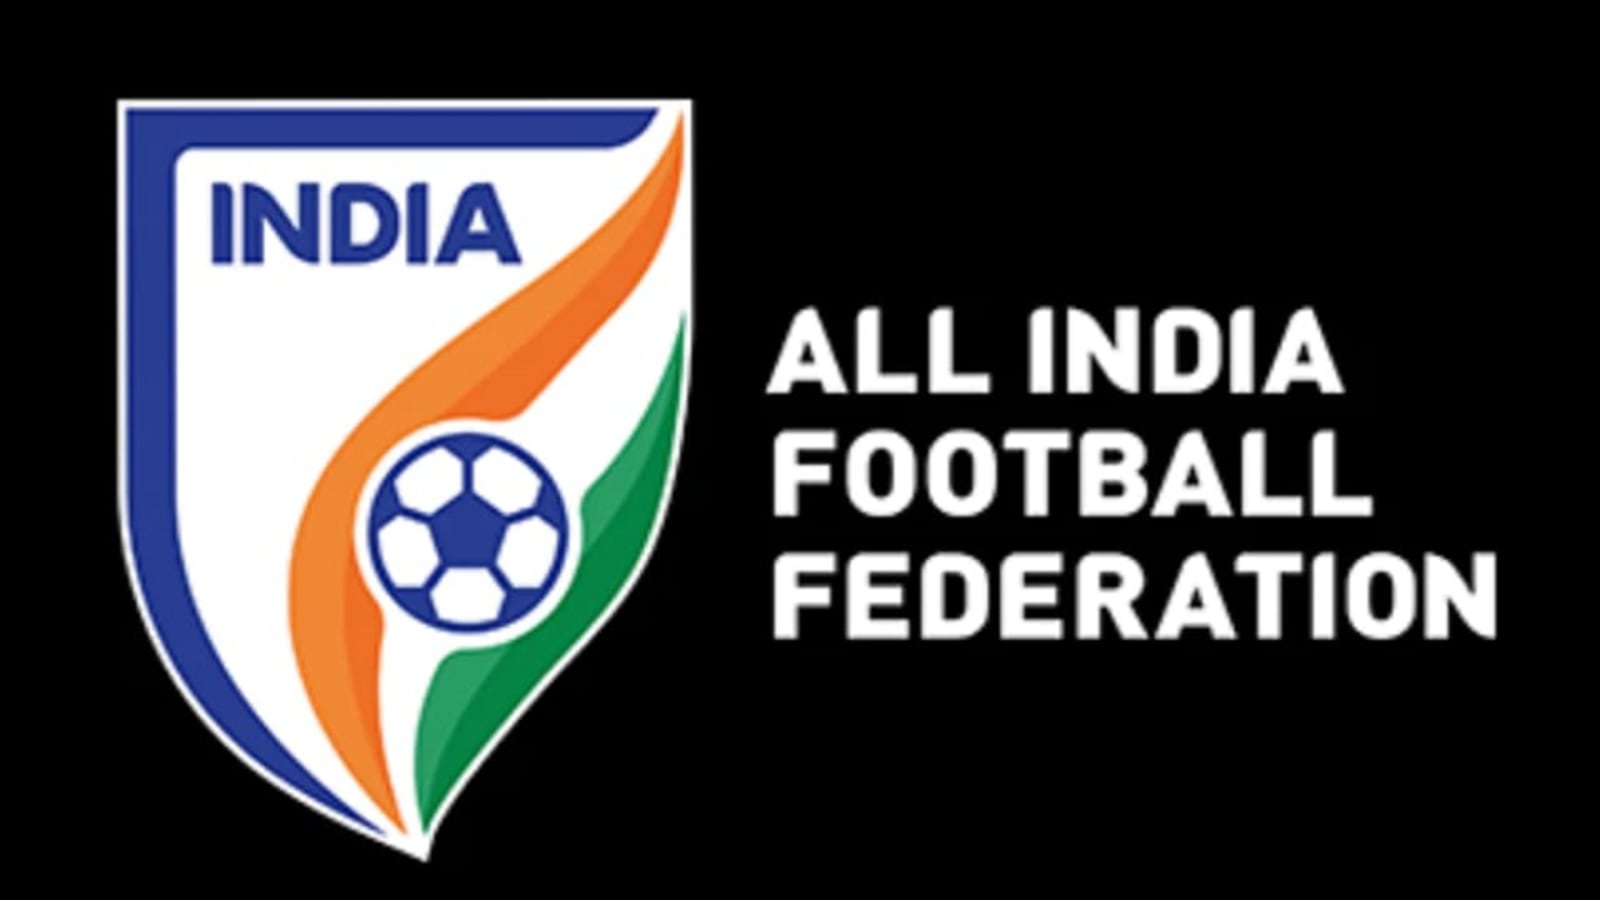 aiff-ban-sports-ministry-requests-fifa-afc-to-allow-indian-clubs-play-afc-tournaments